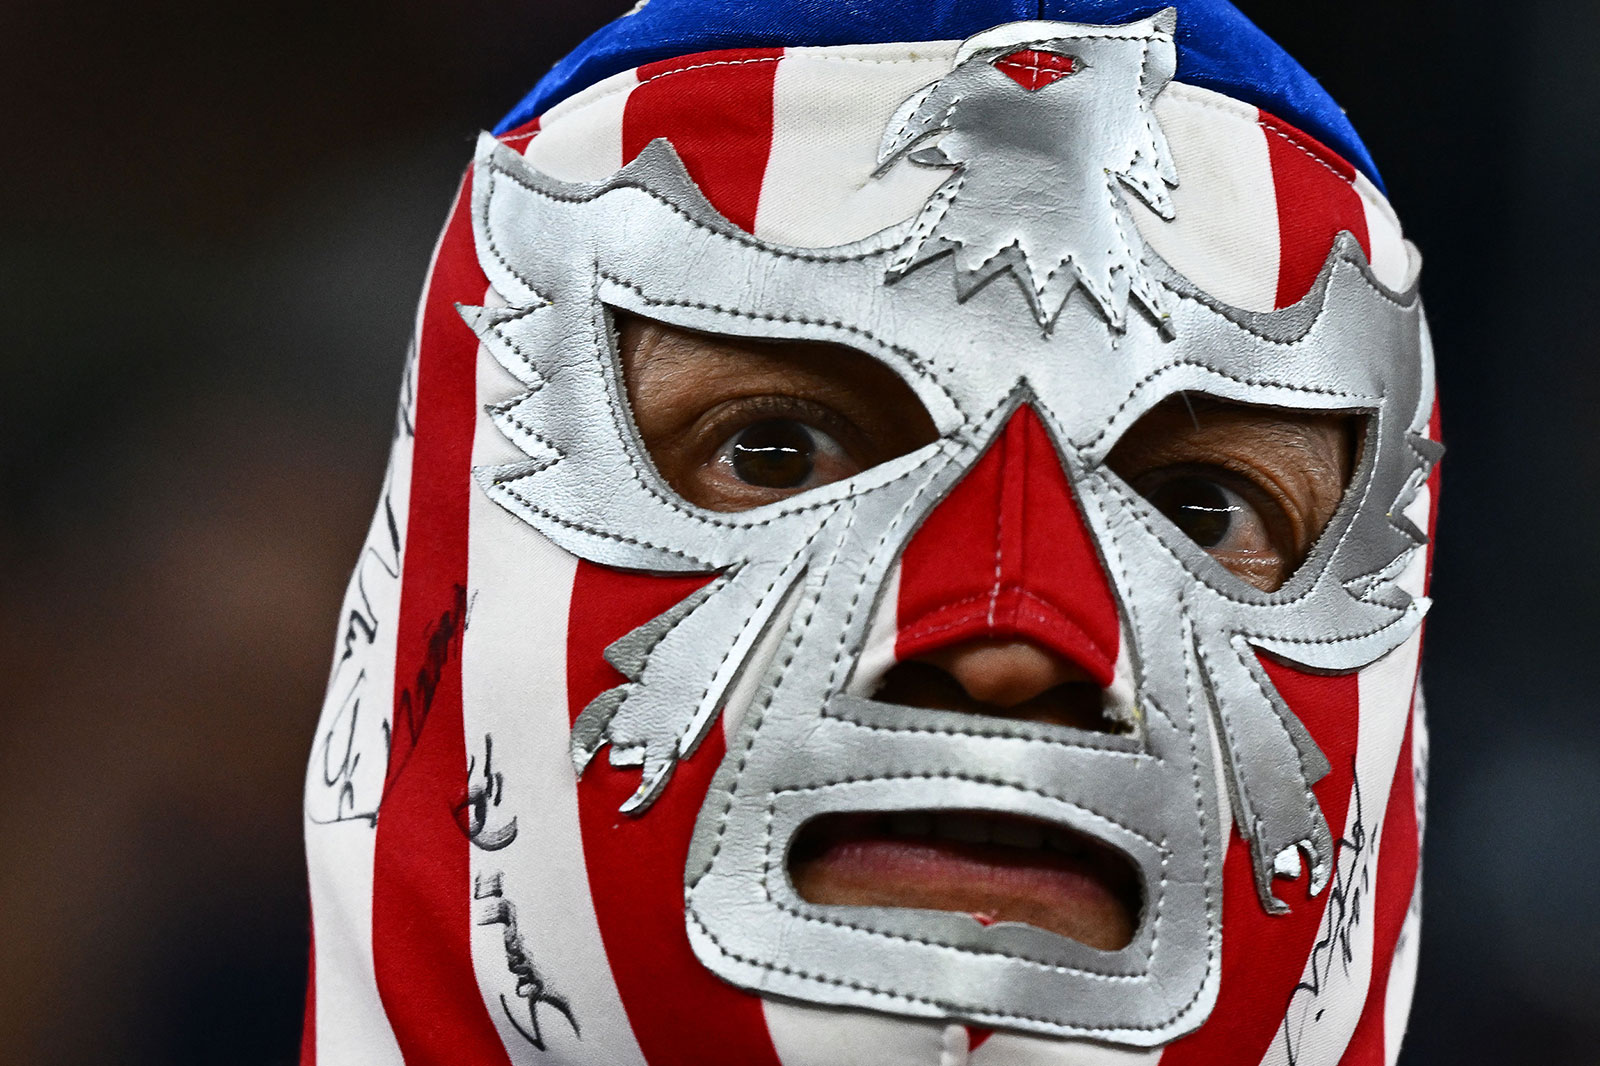 A USA fan wearing an American-themed luchador mask waits in the stands ahead of the match against Wales on November 21.